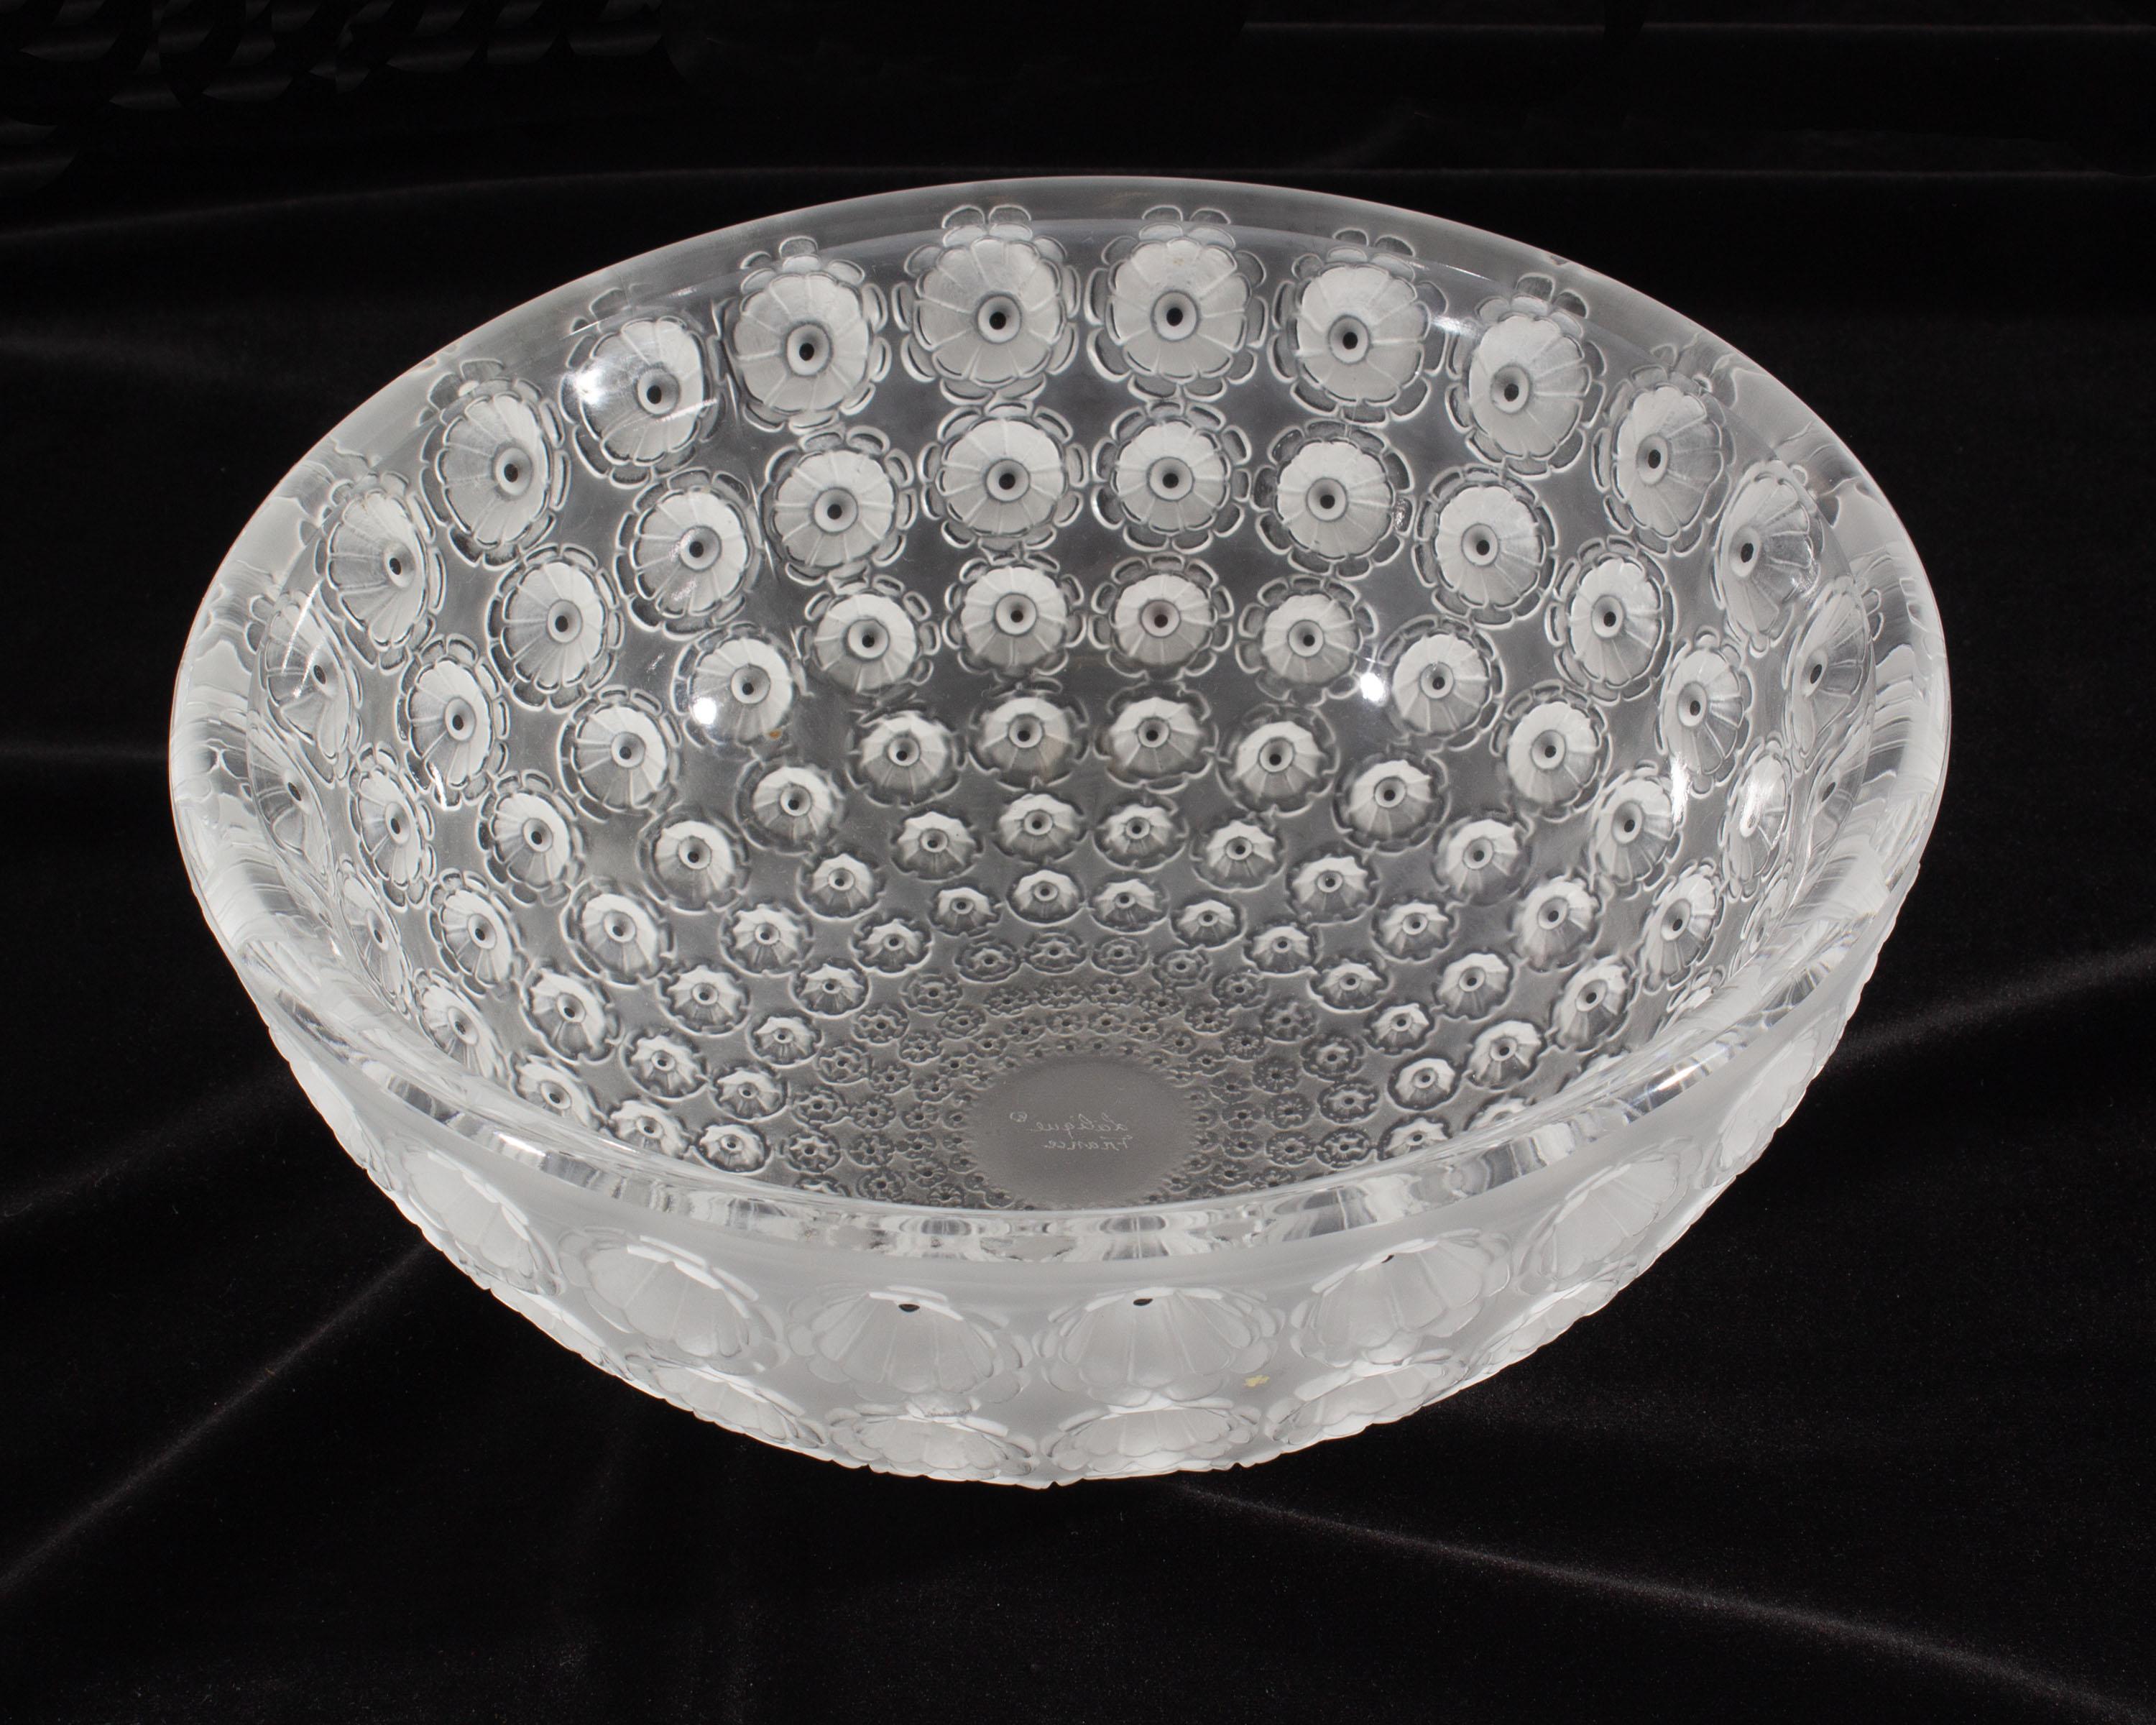 A vintage Lalique France “Nemours” crystal bowl. The frosted bowl is comprised of recessed 